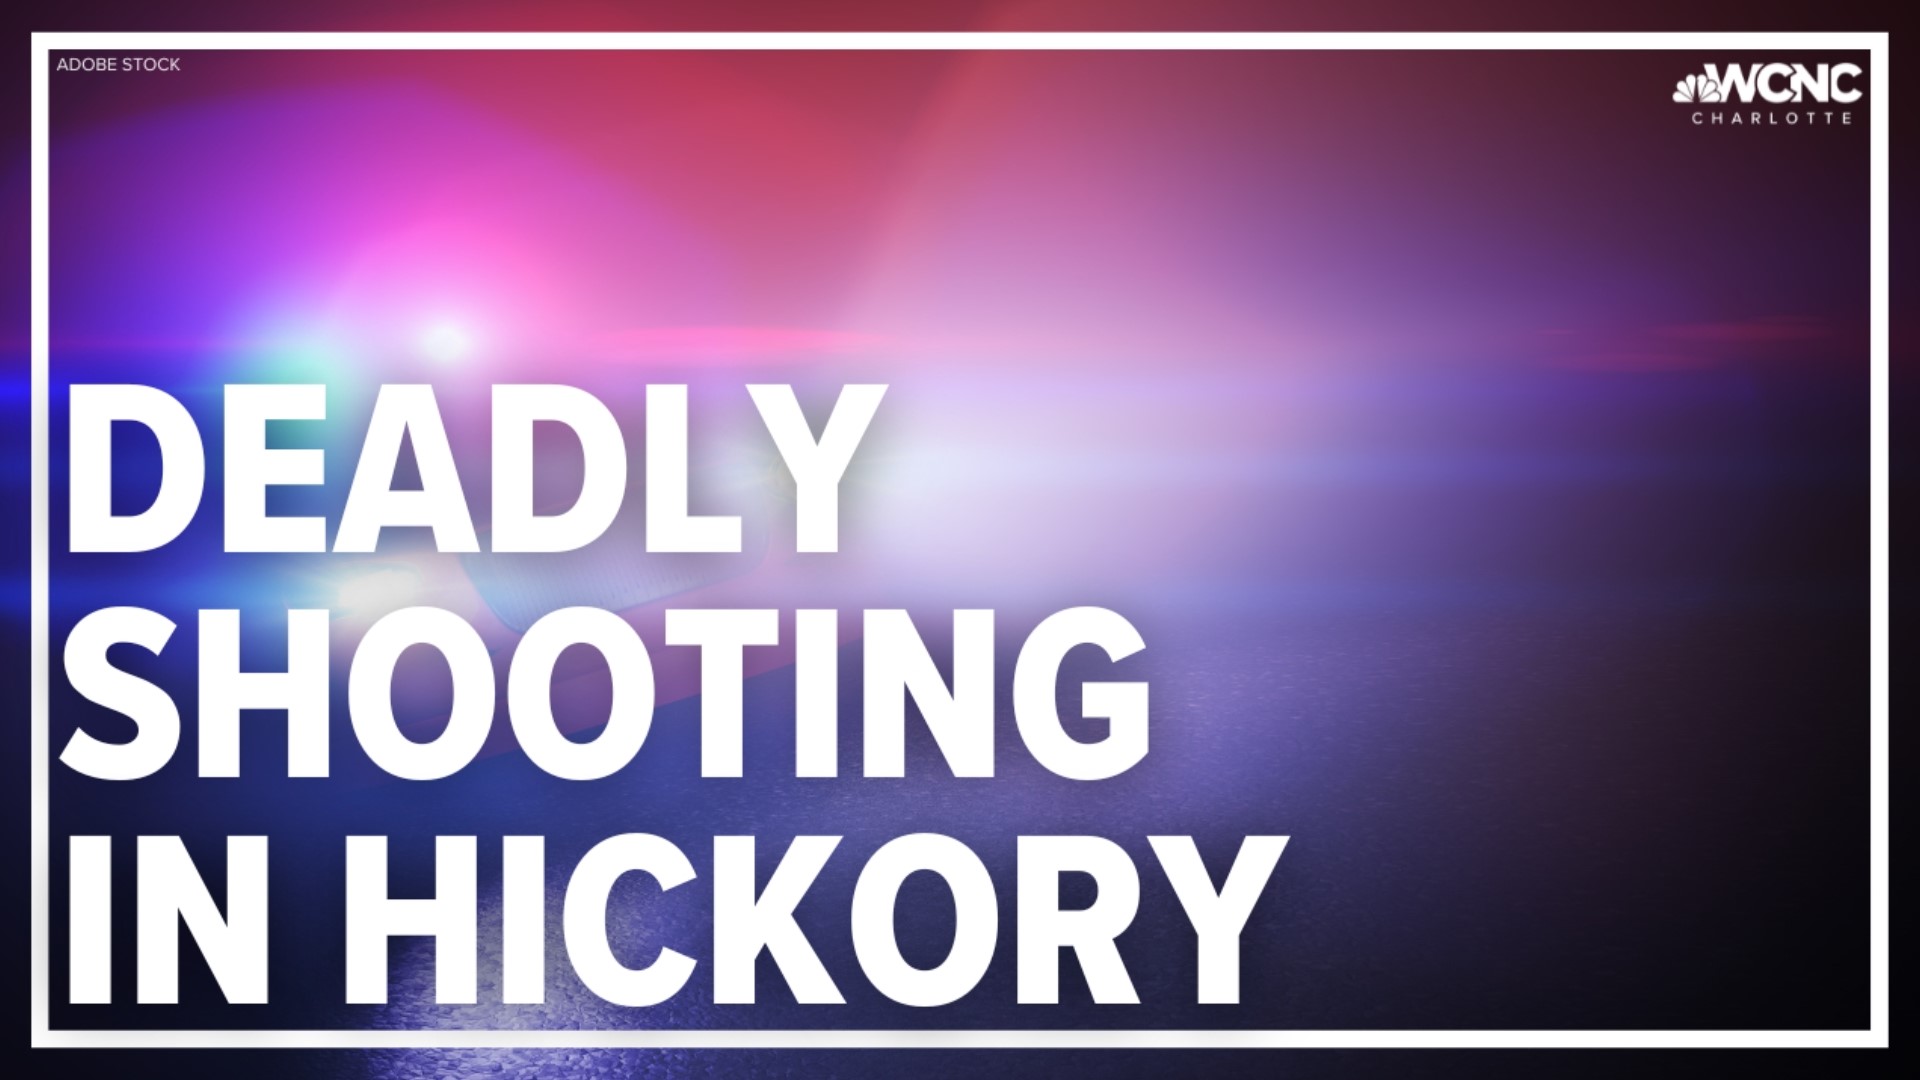 Police say a man called 911 to report that he had shot his roommate in Hickory on Monday.